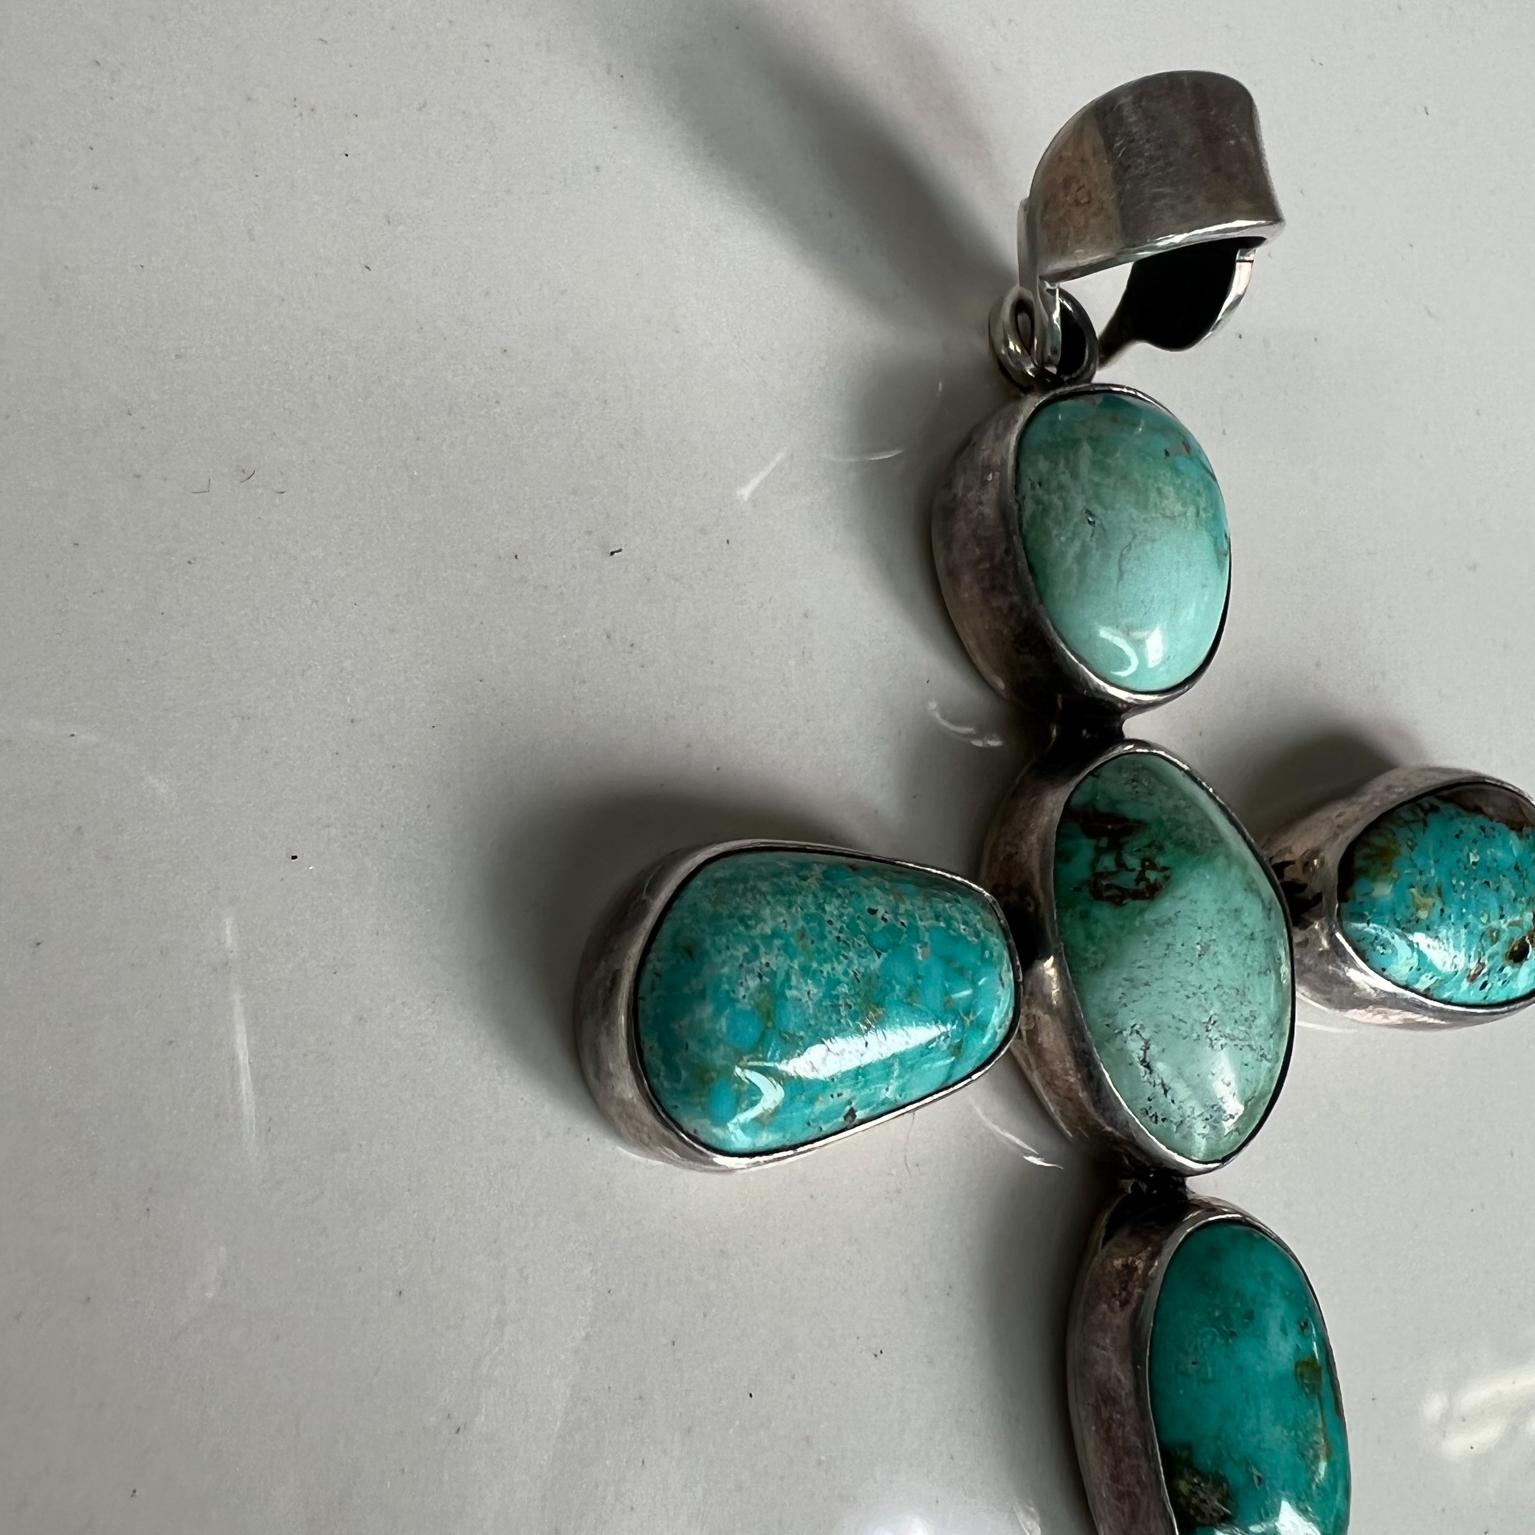 Late 20th Century 1970s Vintage Navajo Southwestern Sterling Silver Turquoise Cross Pendant